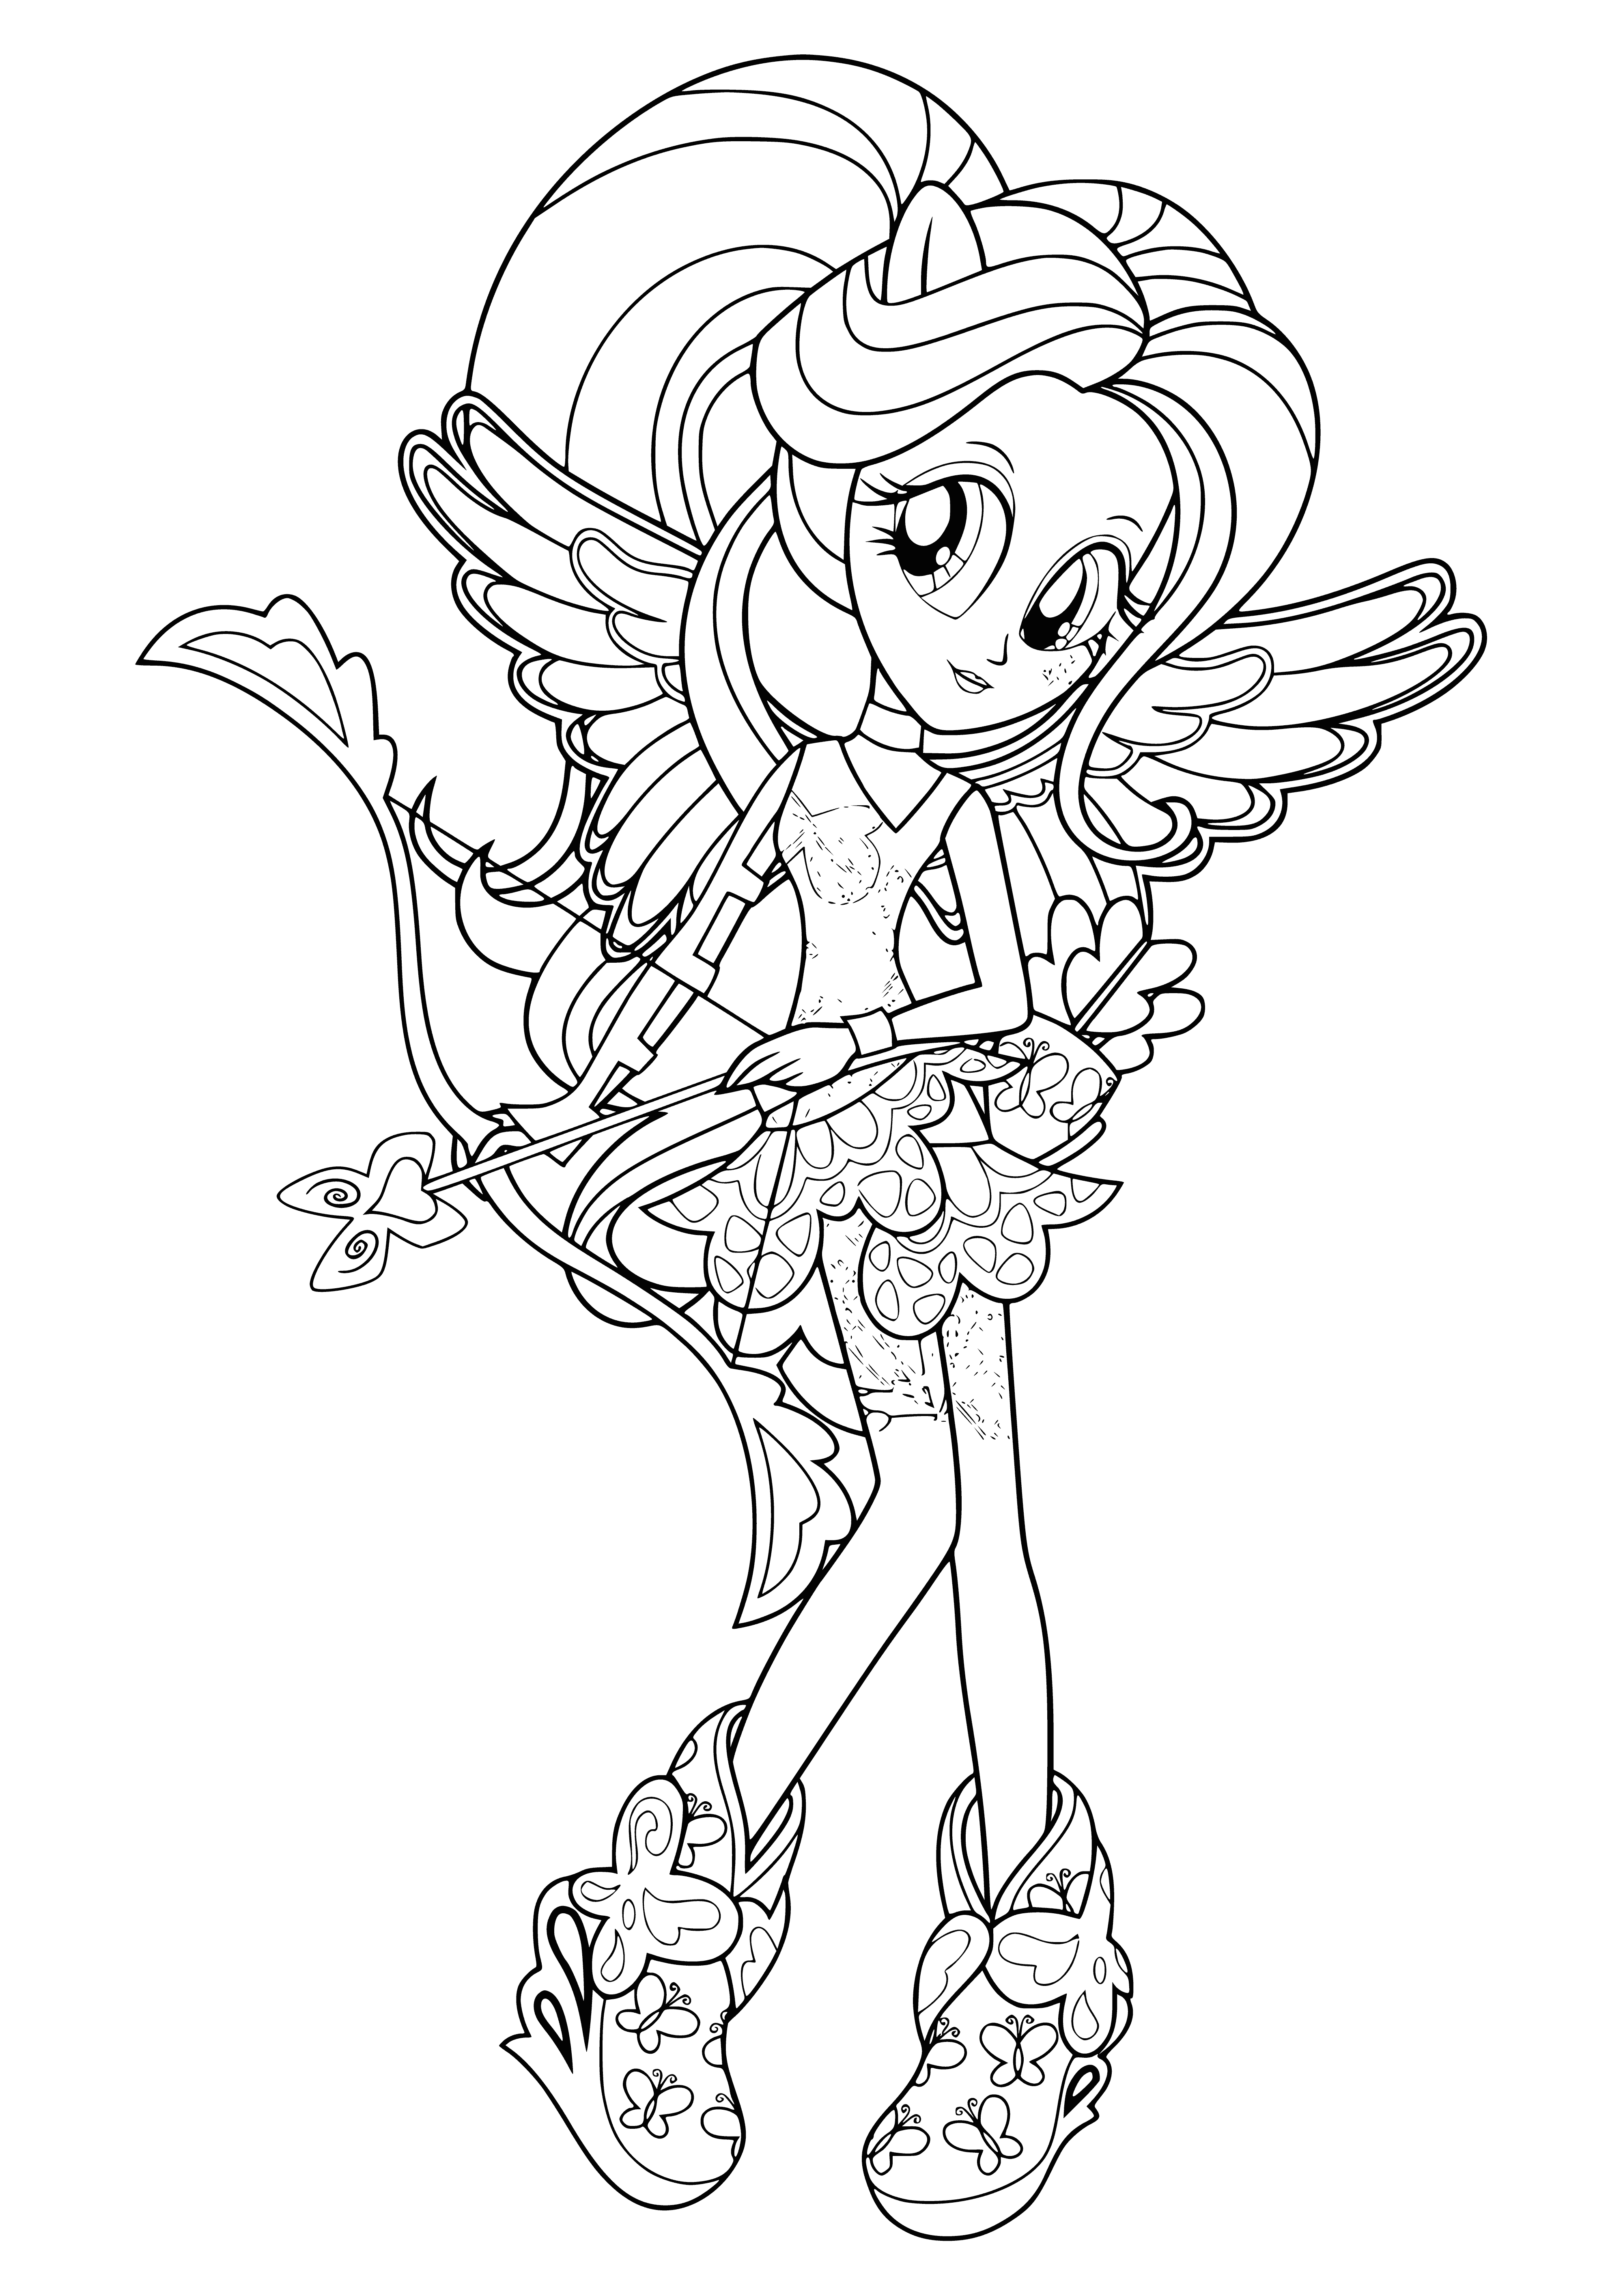 coloring page: Girl with light blue hair & yellow bow holds bow & arrow. Wearing light blue shirt & yellow jacket, with quiver of arrows on her back.